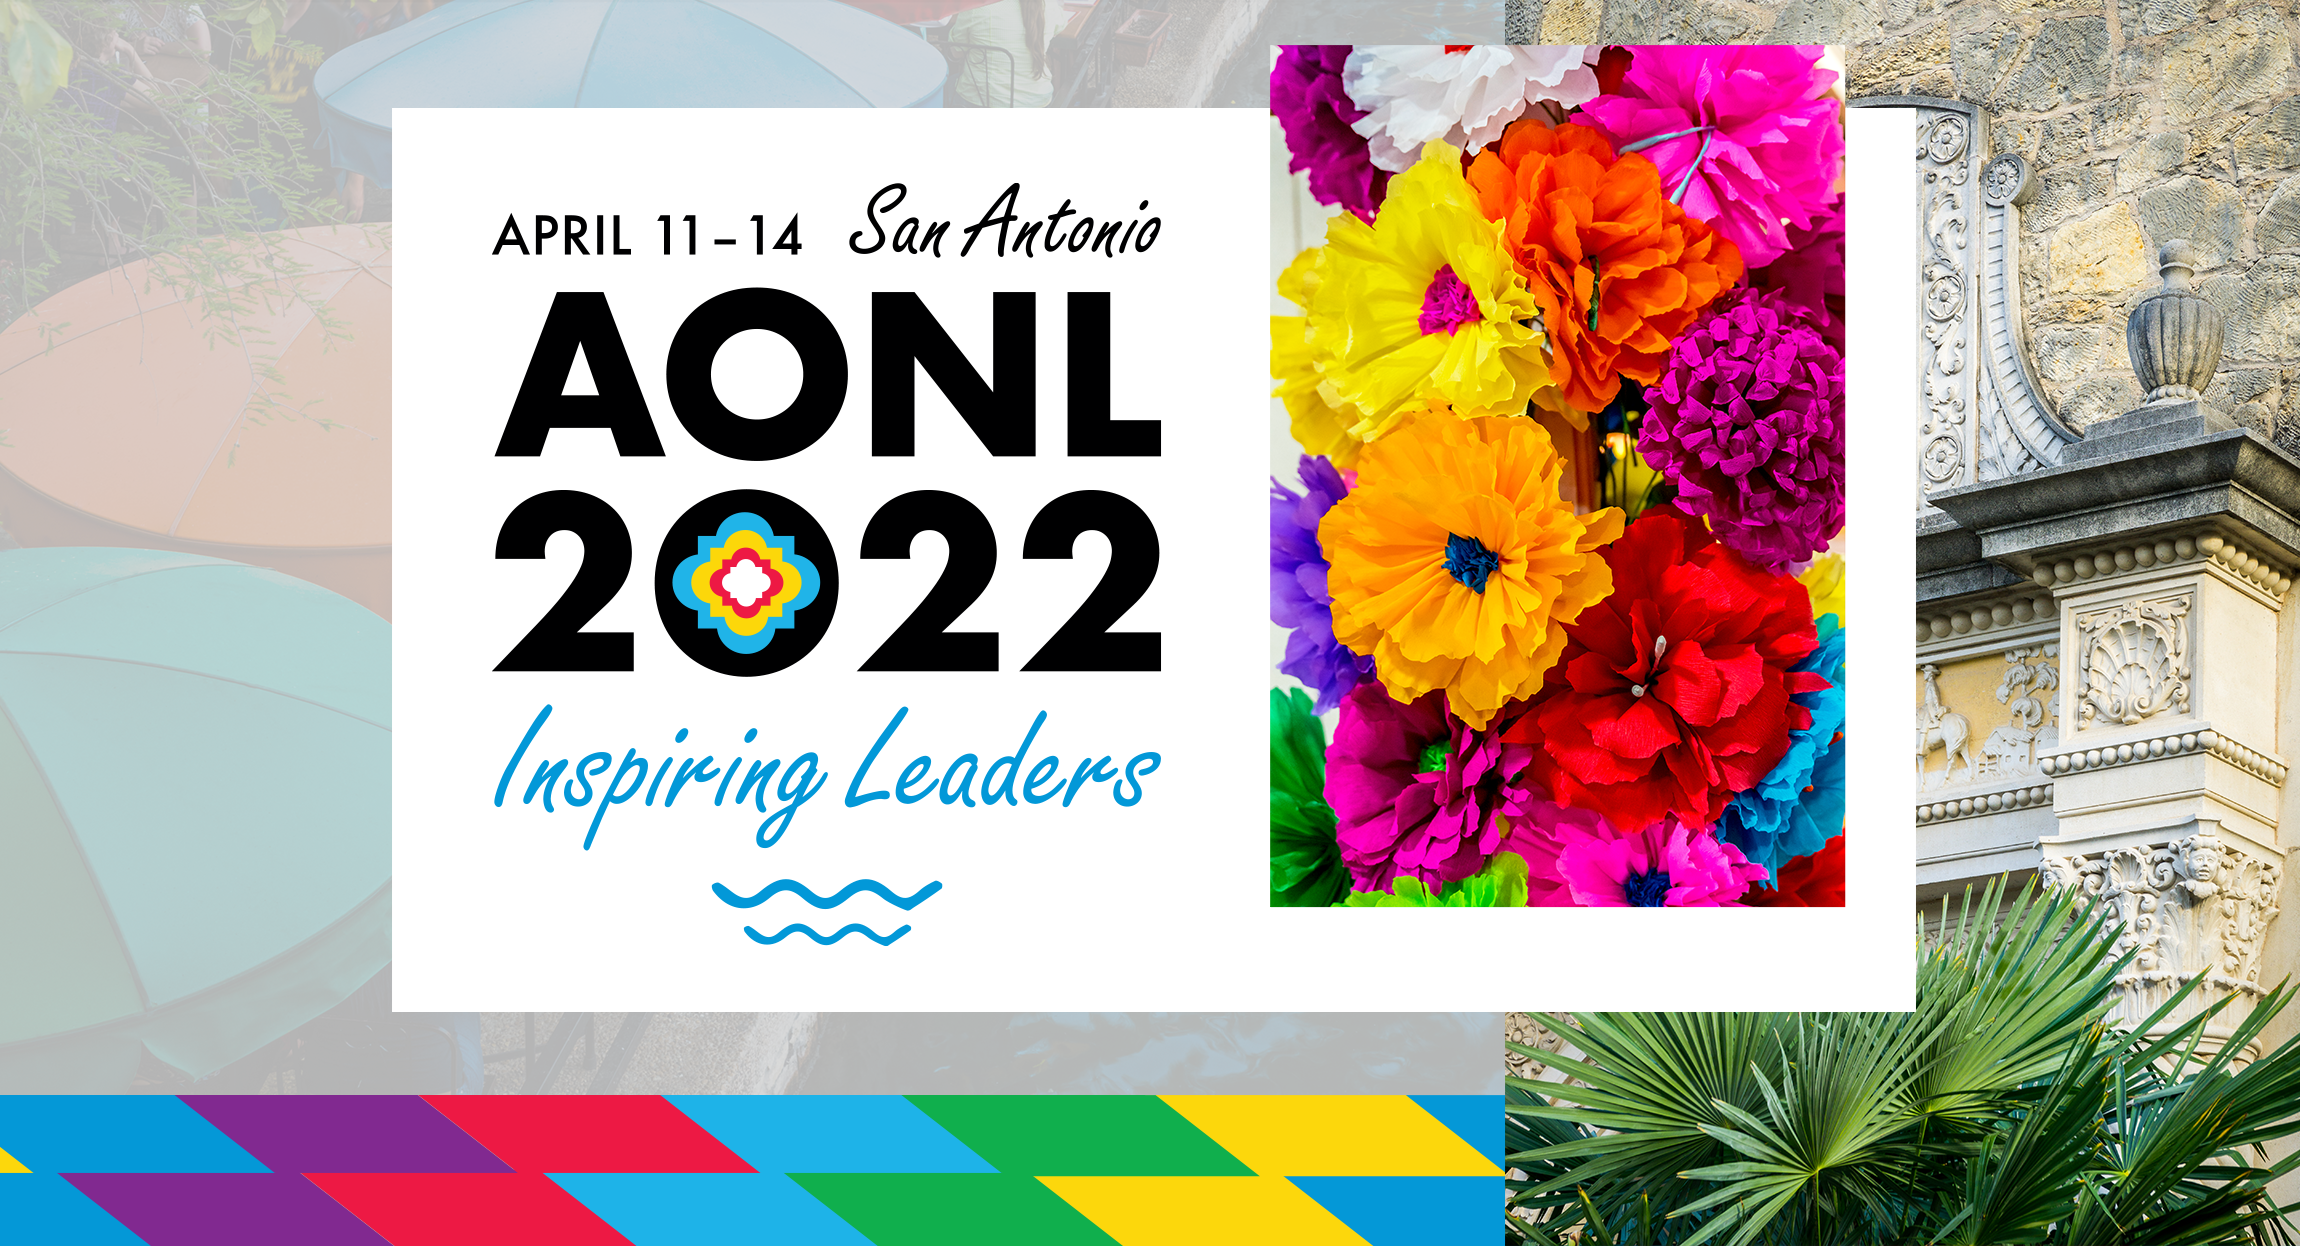 AONL 2022 Annual Conference Branding Design by Hughes design | communications